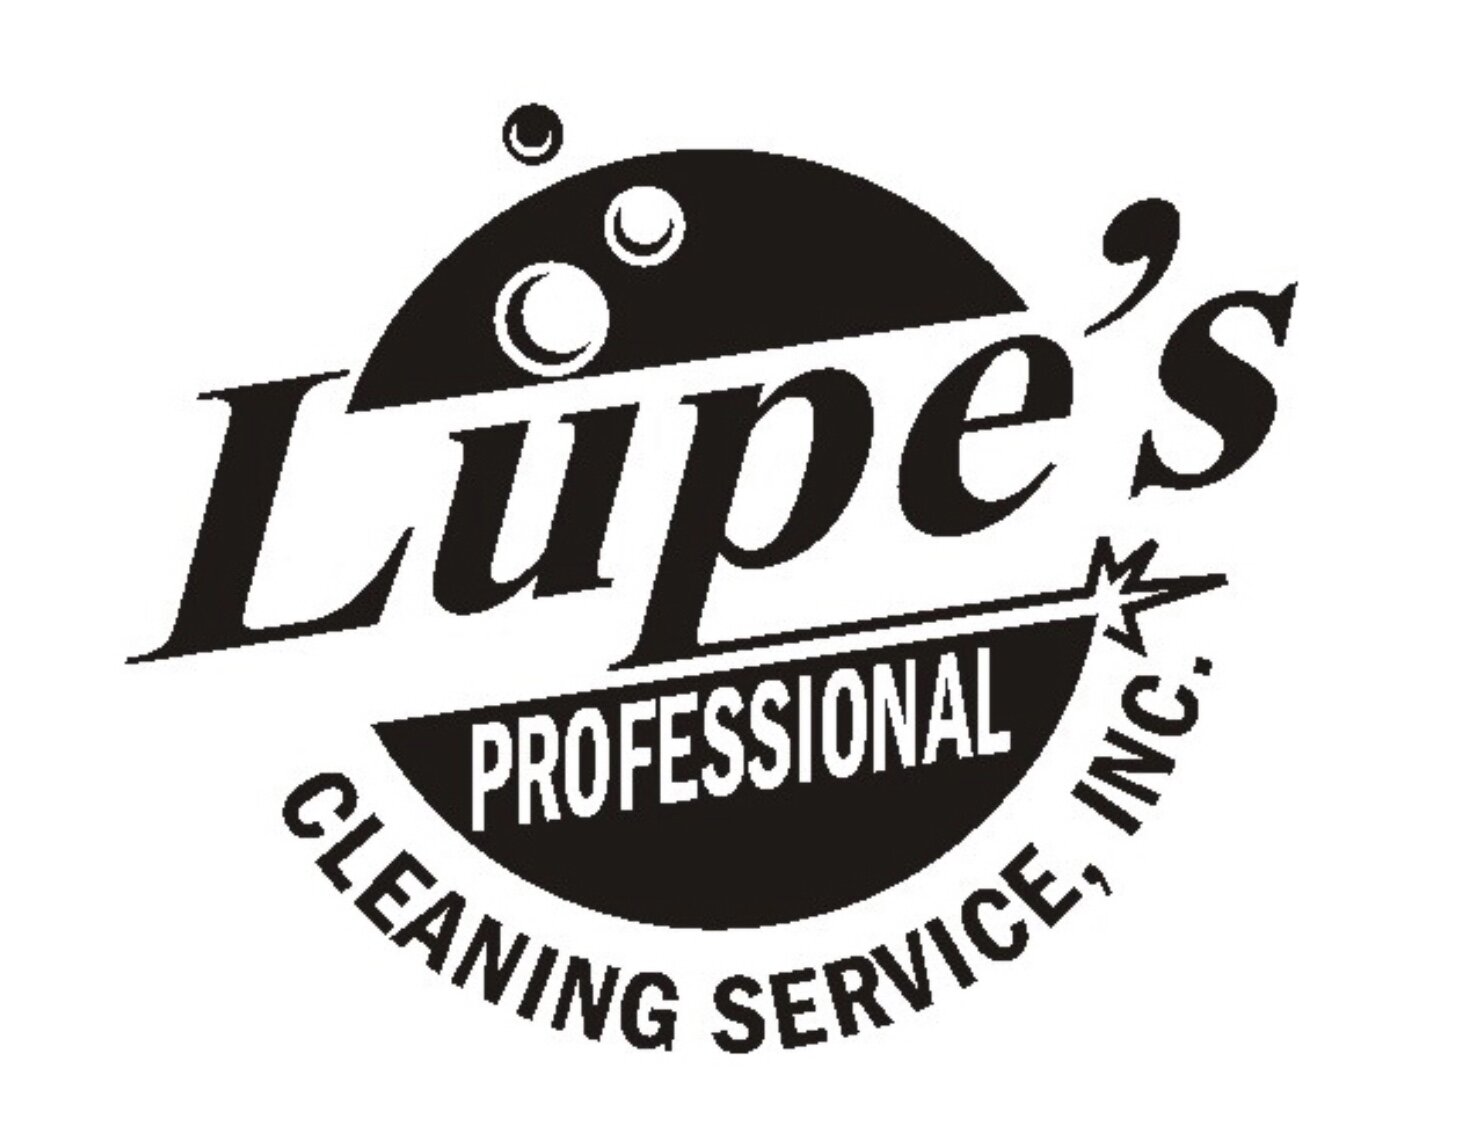 Lupe’s Professional Cleaning Service